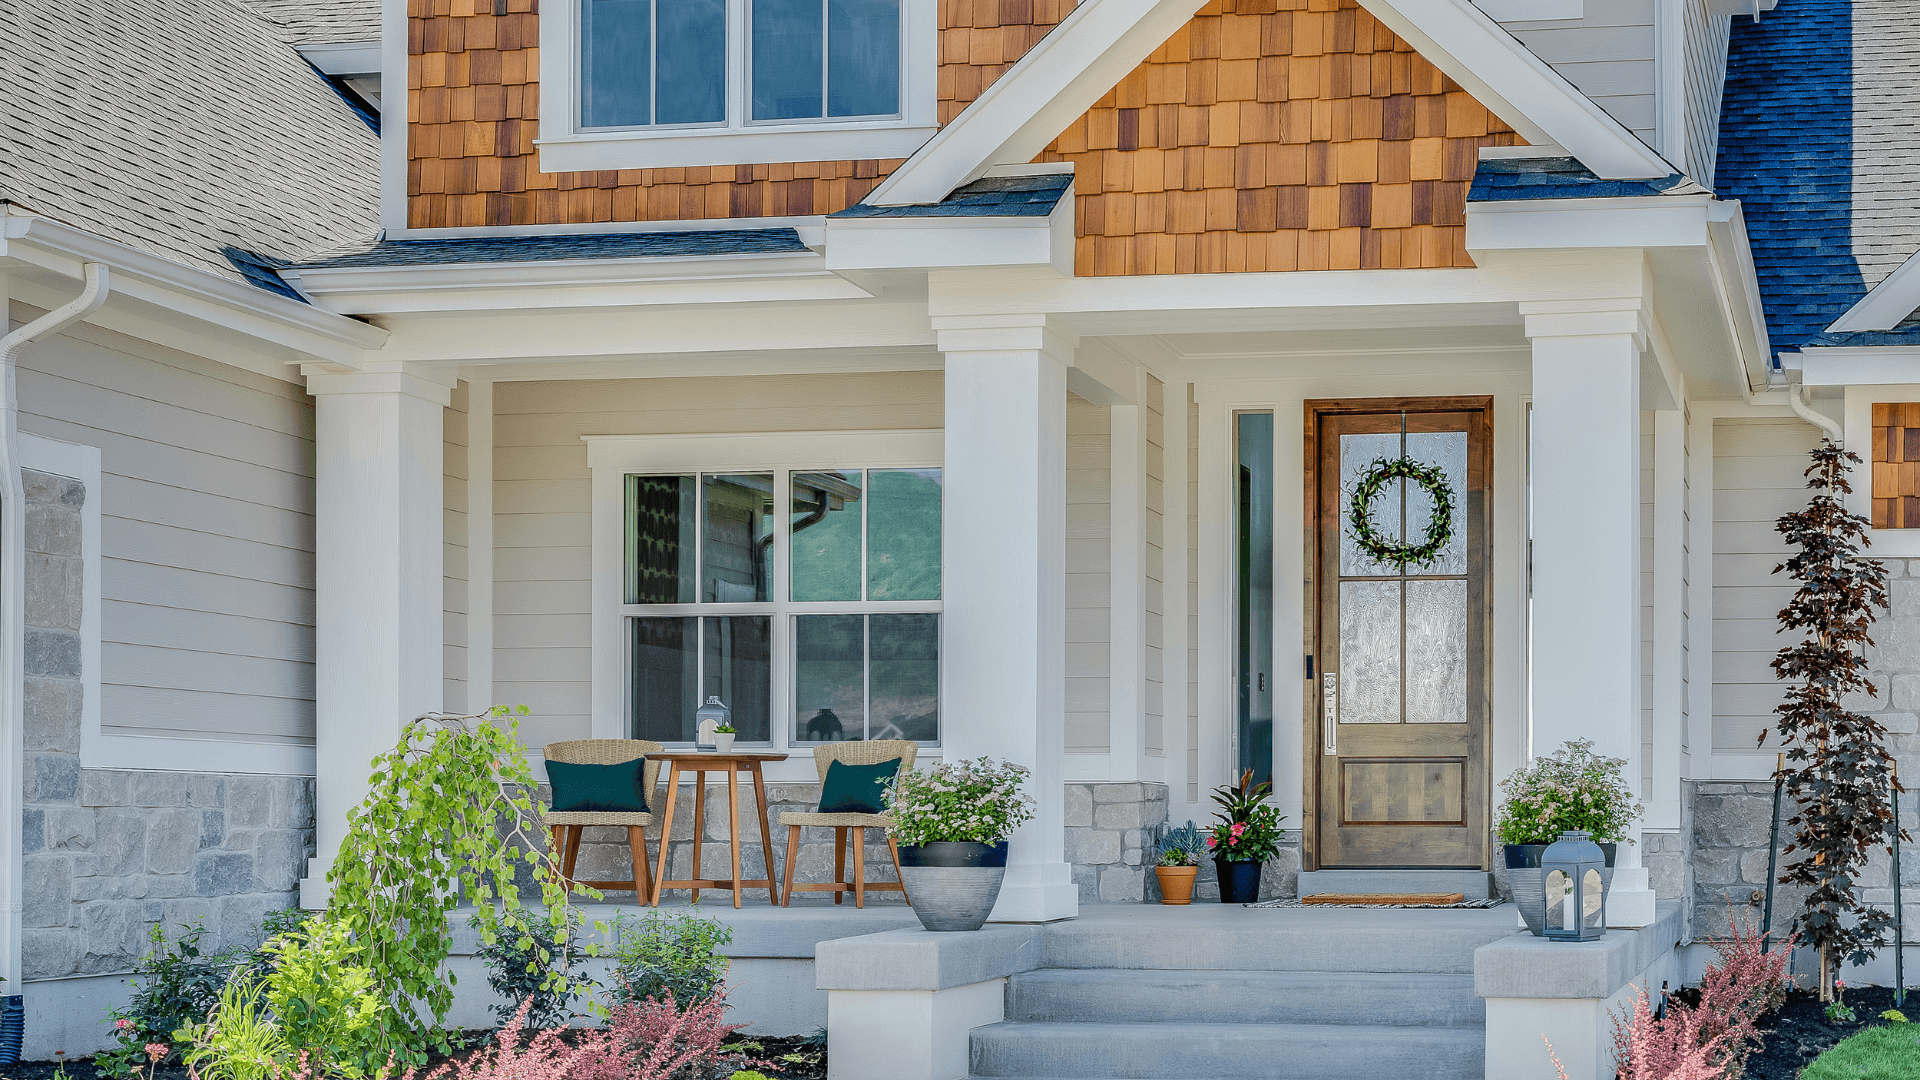 Beautiful house with wood panel, wreath on the door and inviting porch 